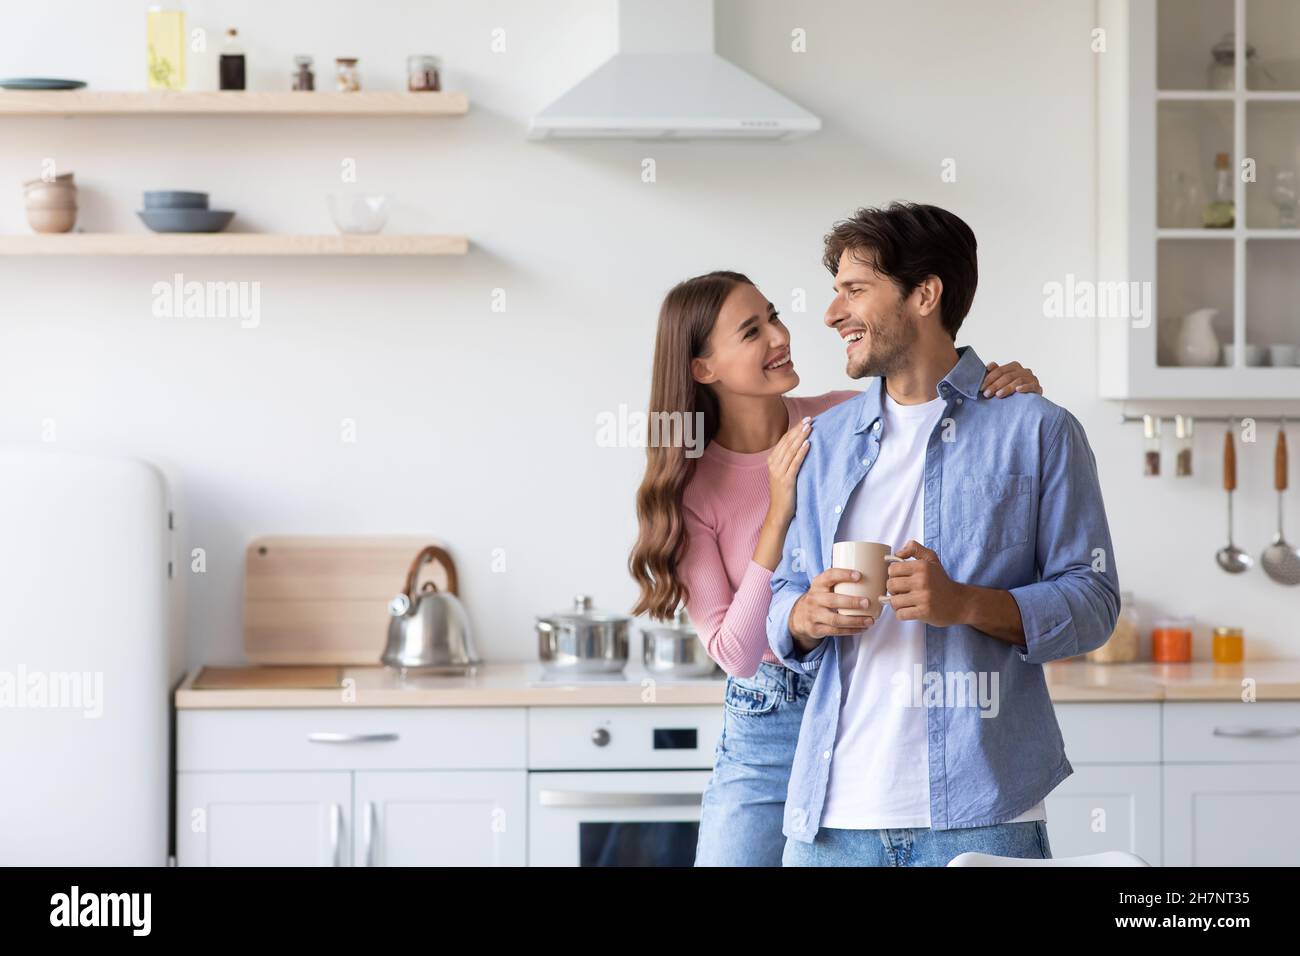 Cheerful millennial european wife hugs husband with cup of hot drink in minimalist kitchen interior Stock Photo